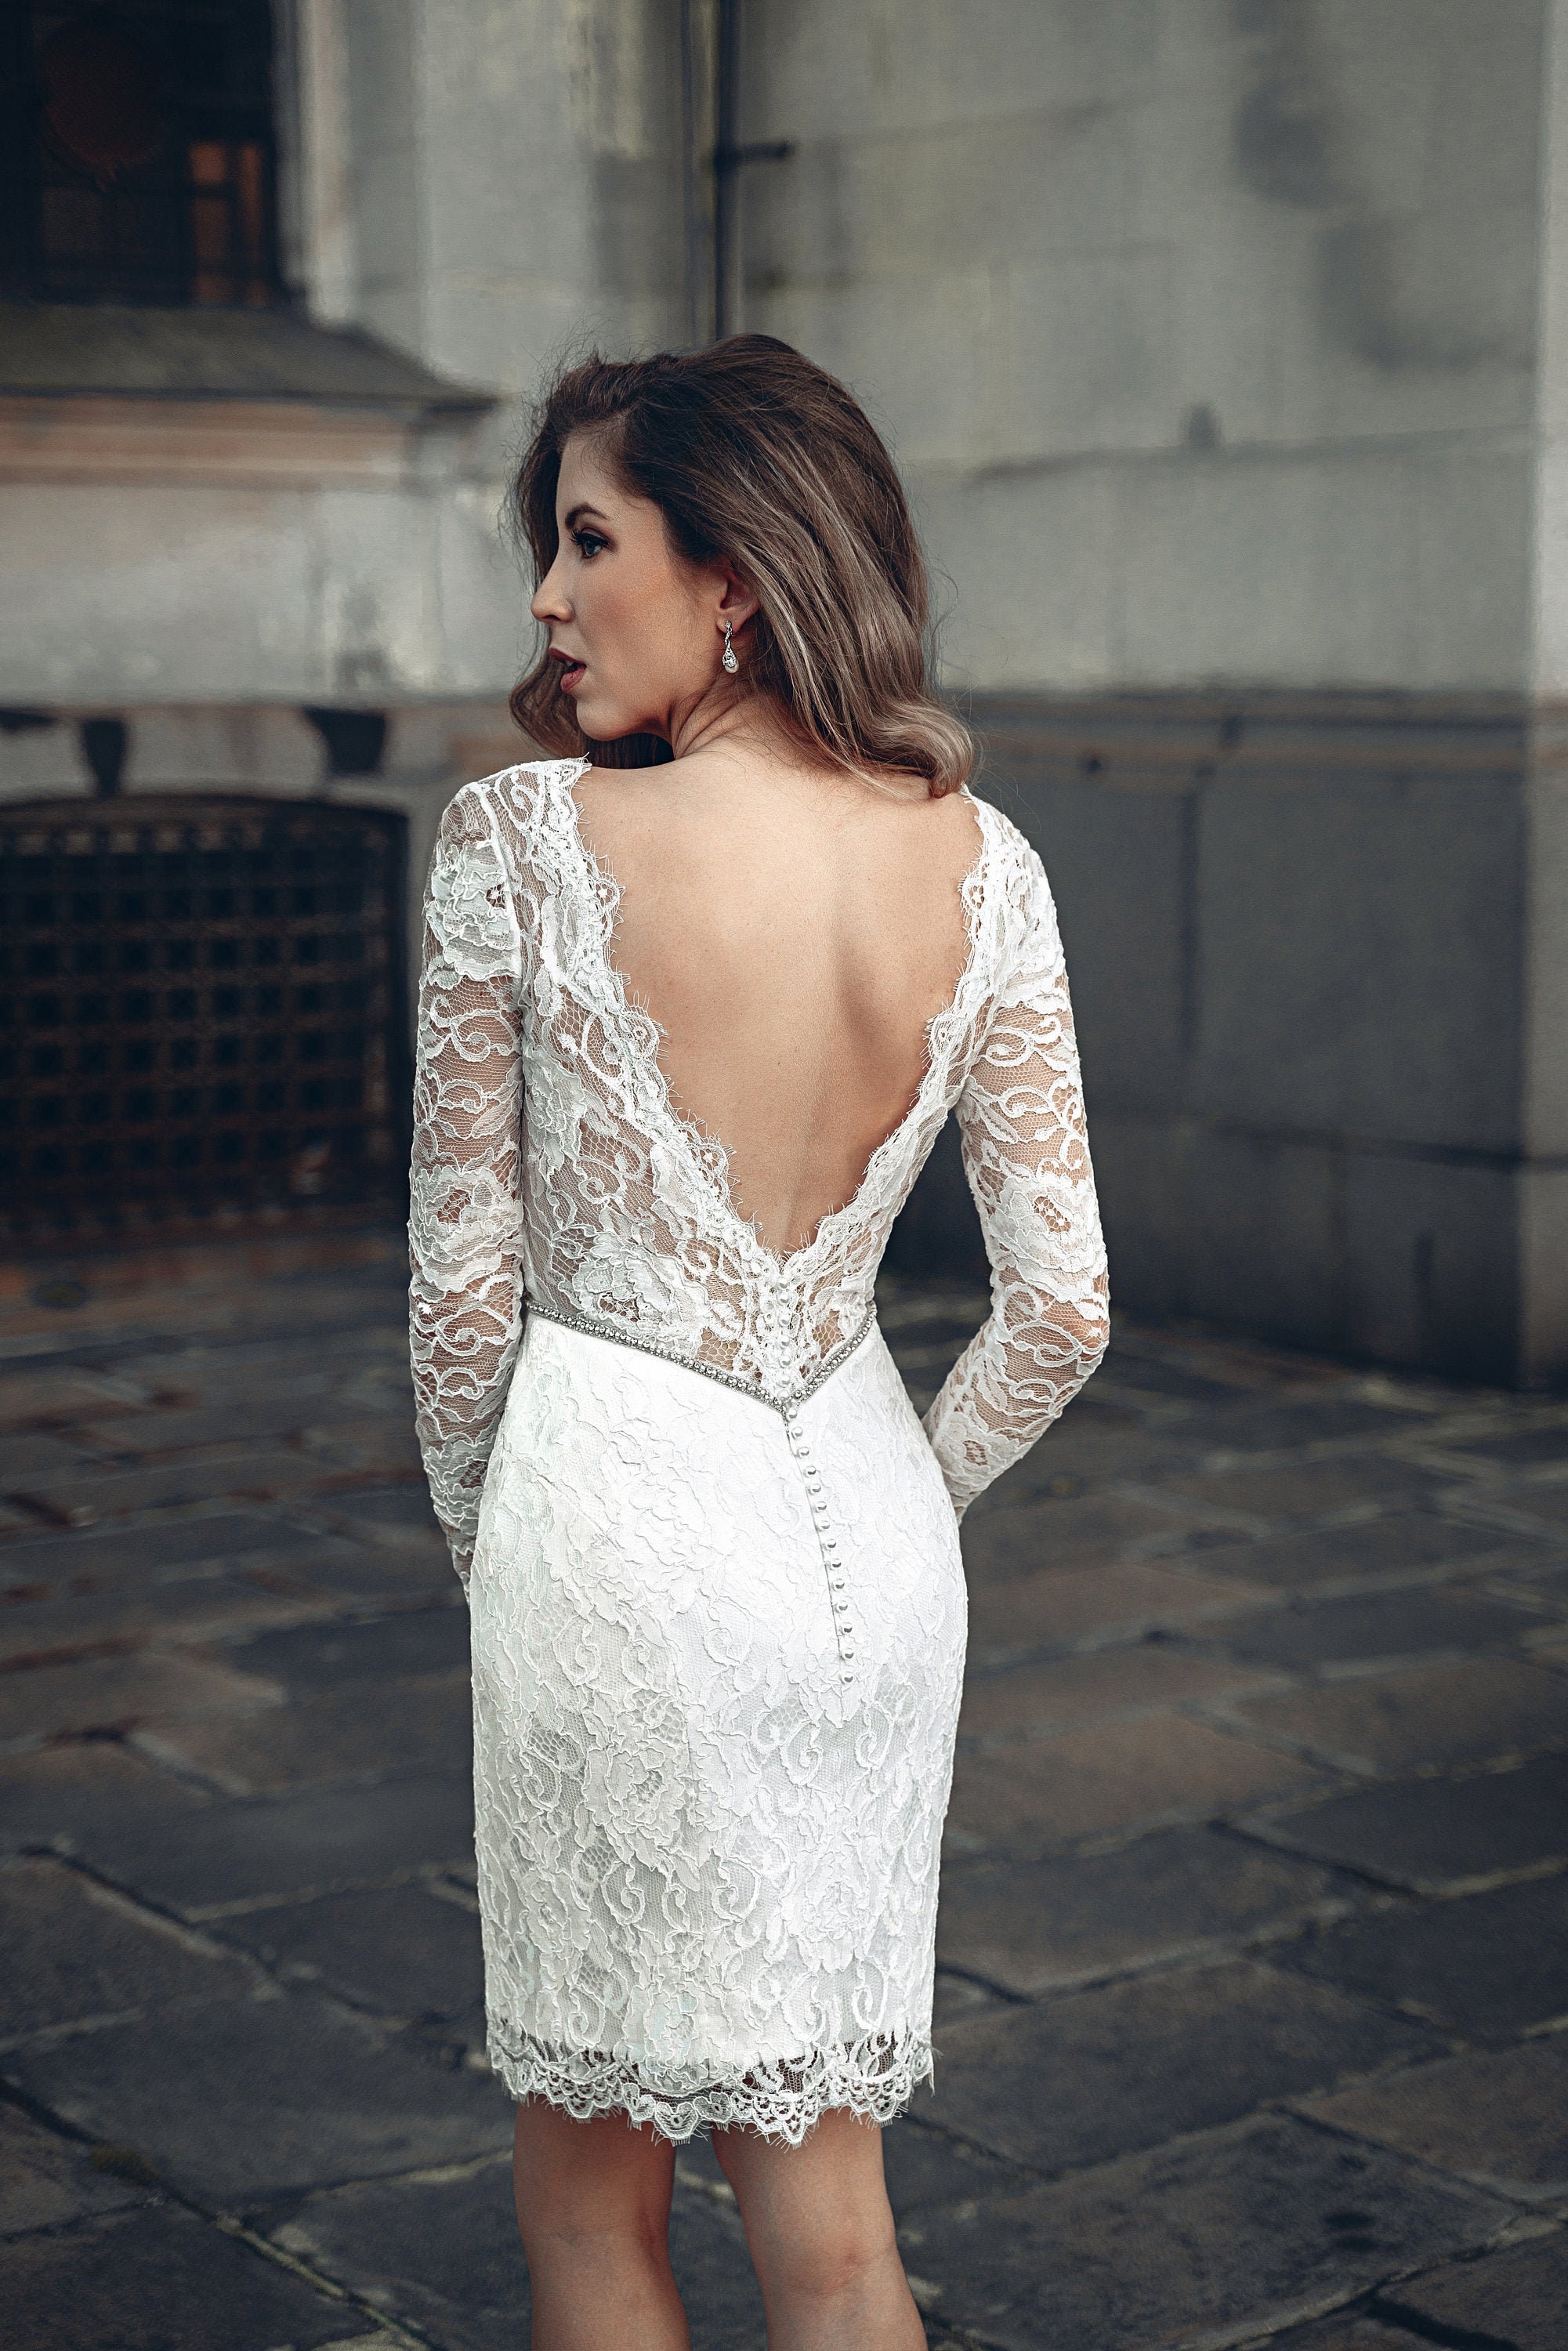 Short Wedding Dress With Sleeves, Reception Dress, French Lace